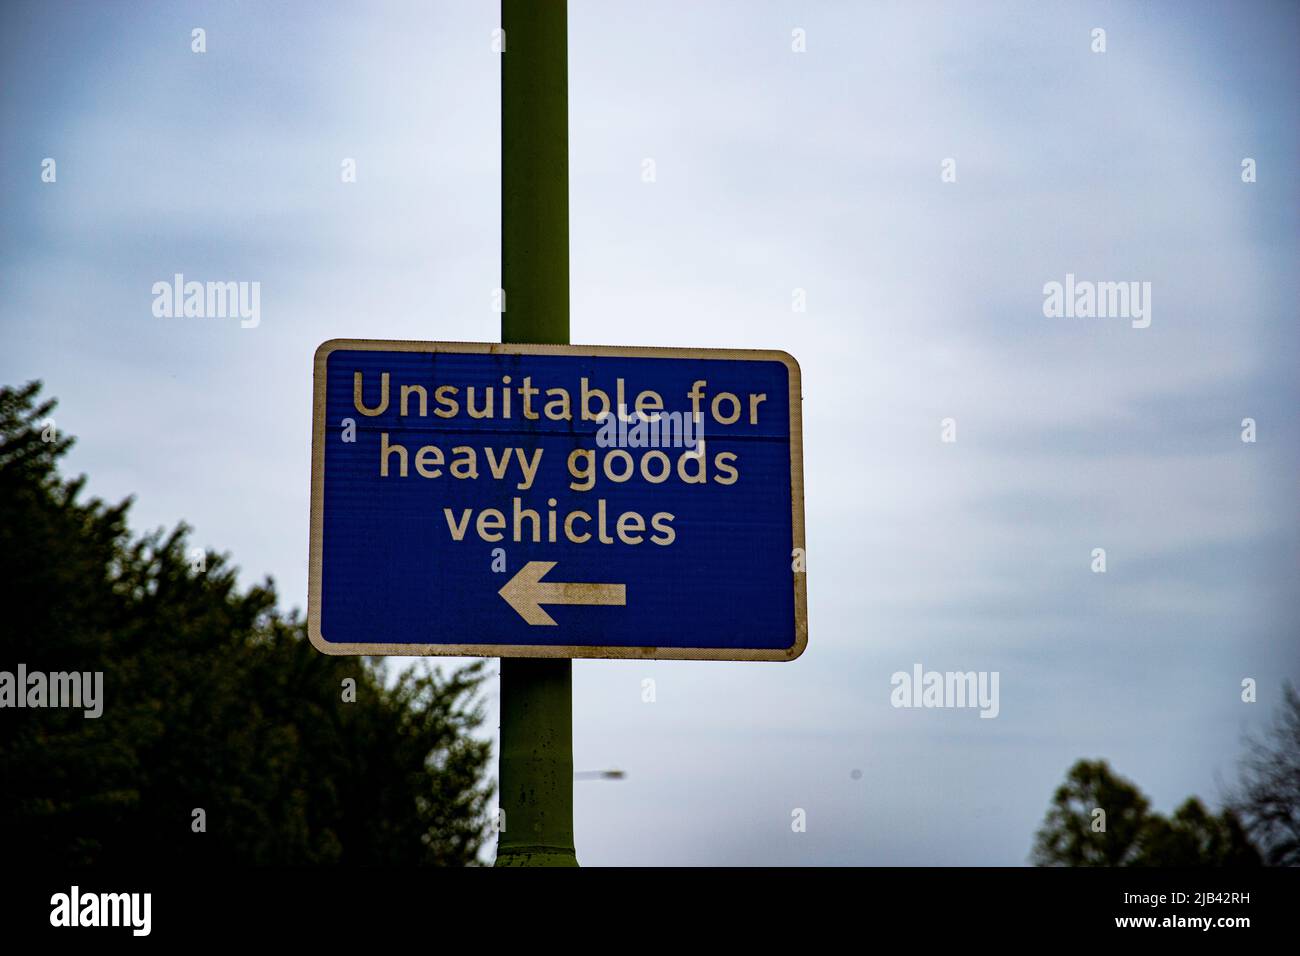 This image of a unsuitable for heavy goods vehicle signs shows its bold blue of the sign itself, amongst its eerie moody sky and background. Stock Photo